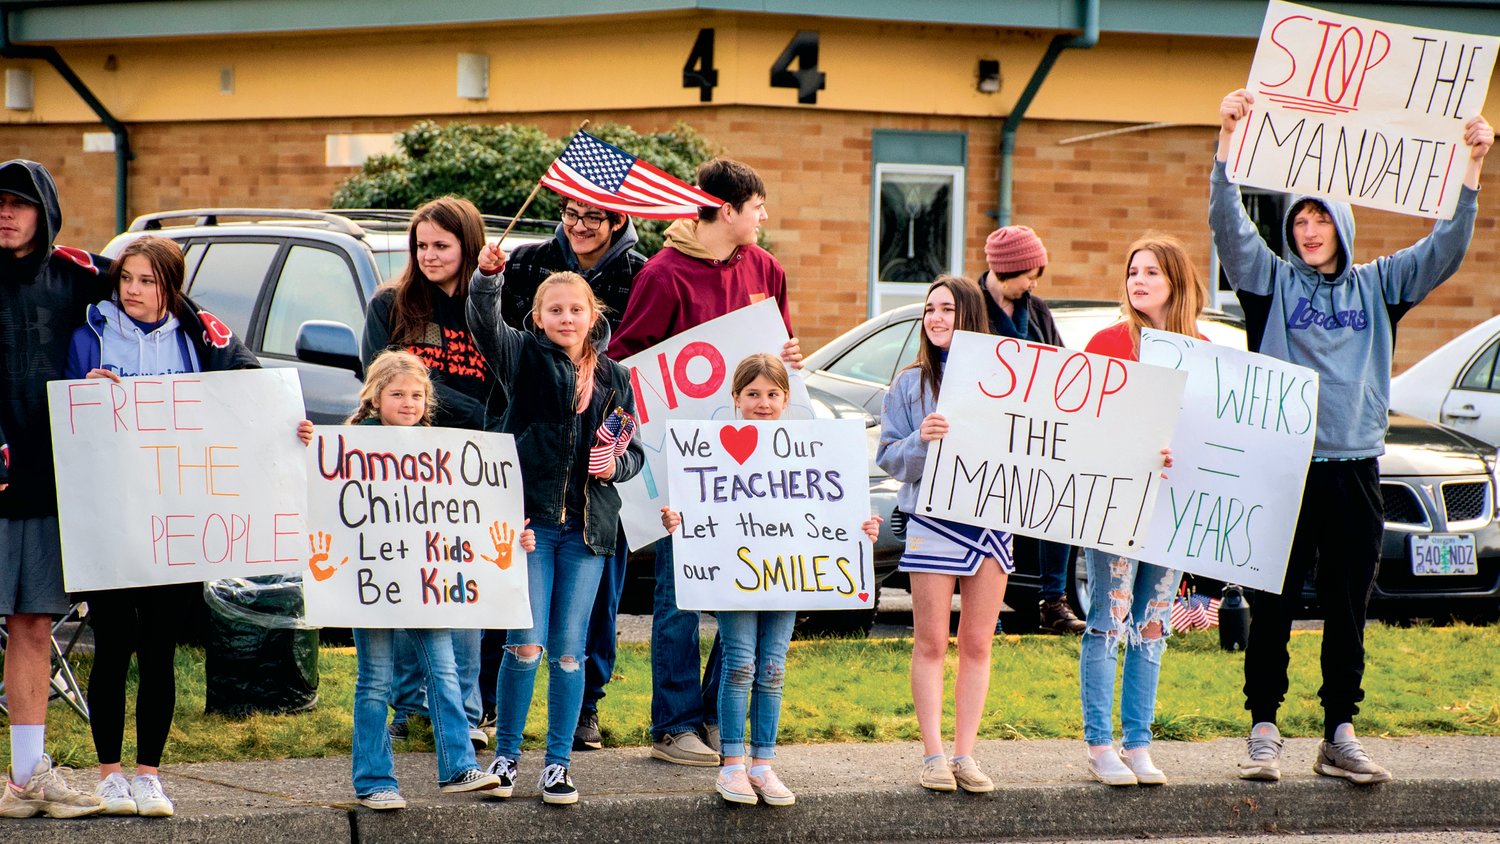 Students in the Onalaska School District stand outside waving signs and flags during a protest along Carlisle Avenue Wednesday morning.